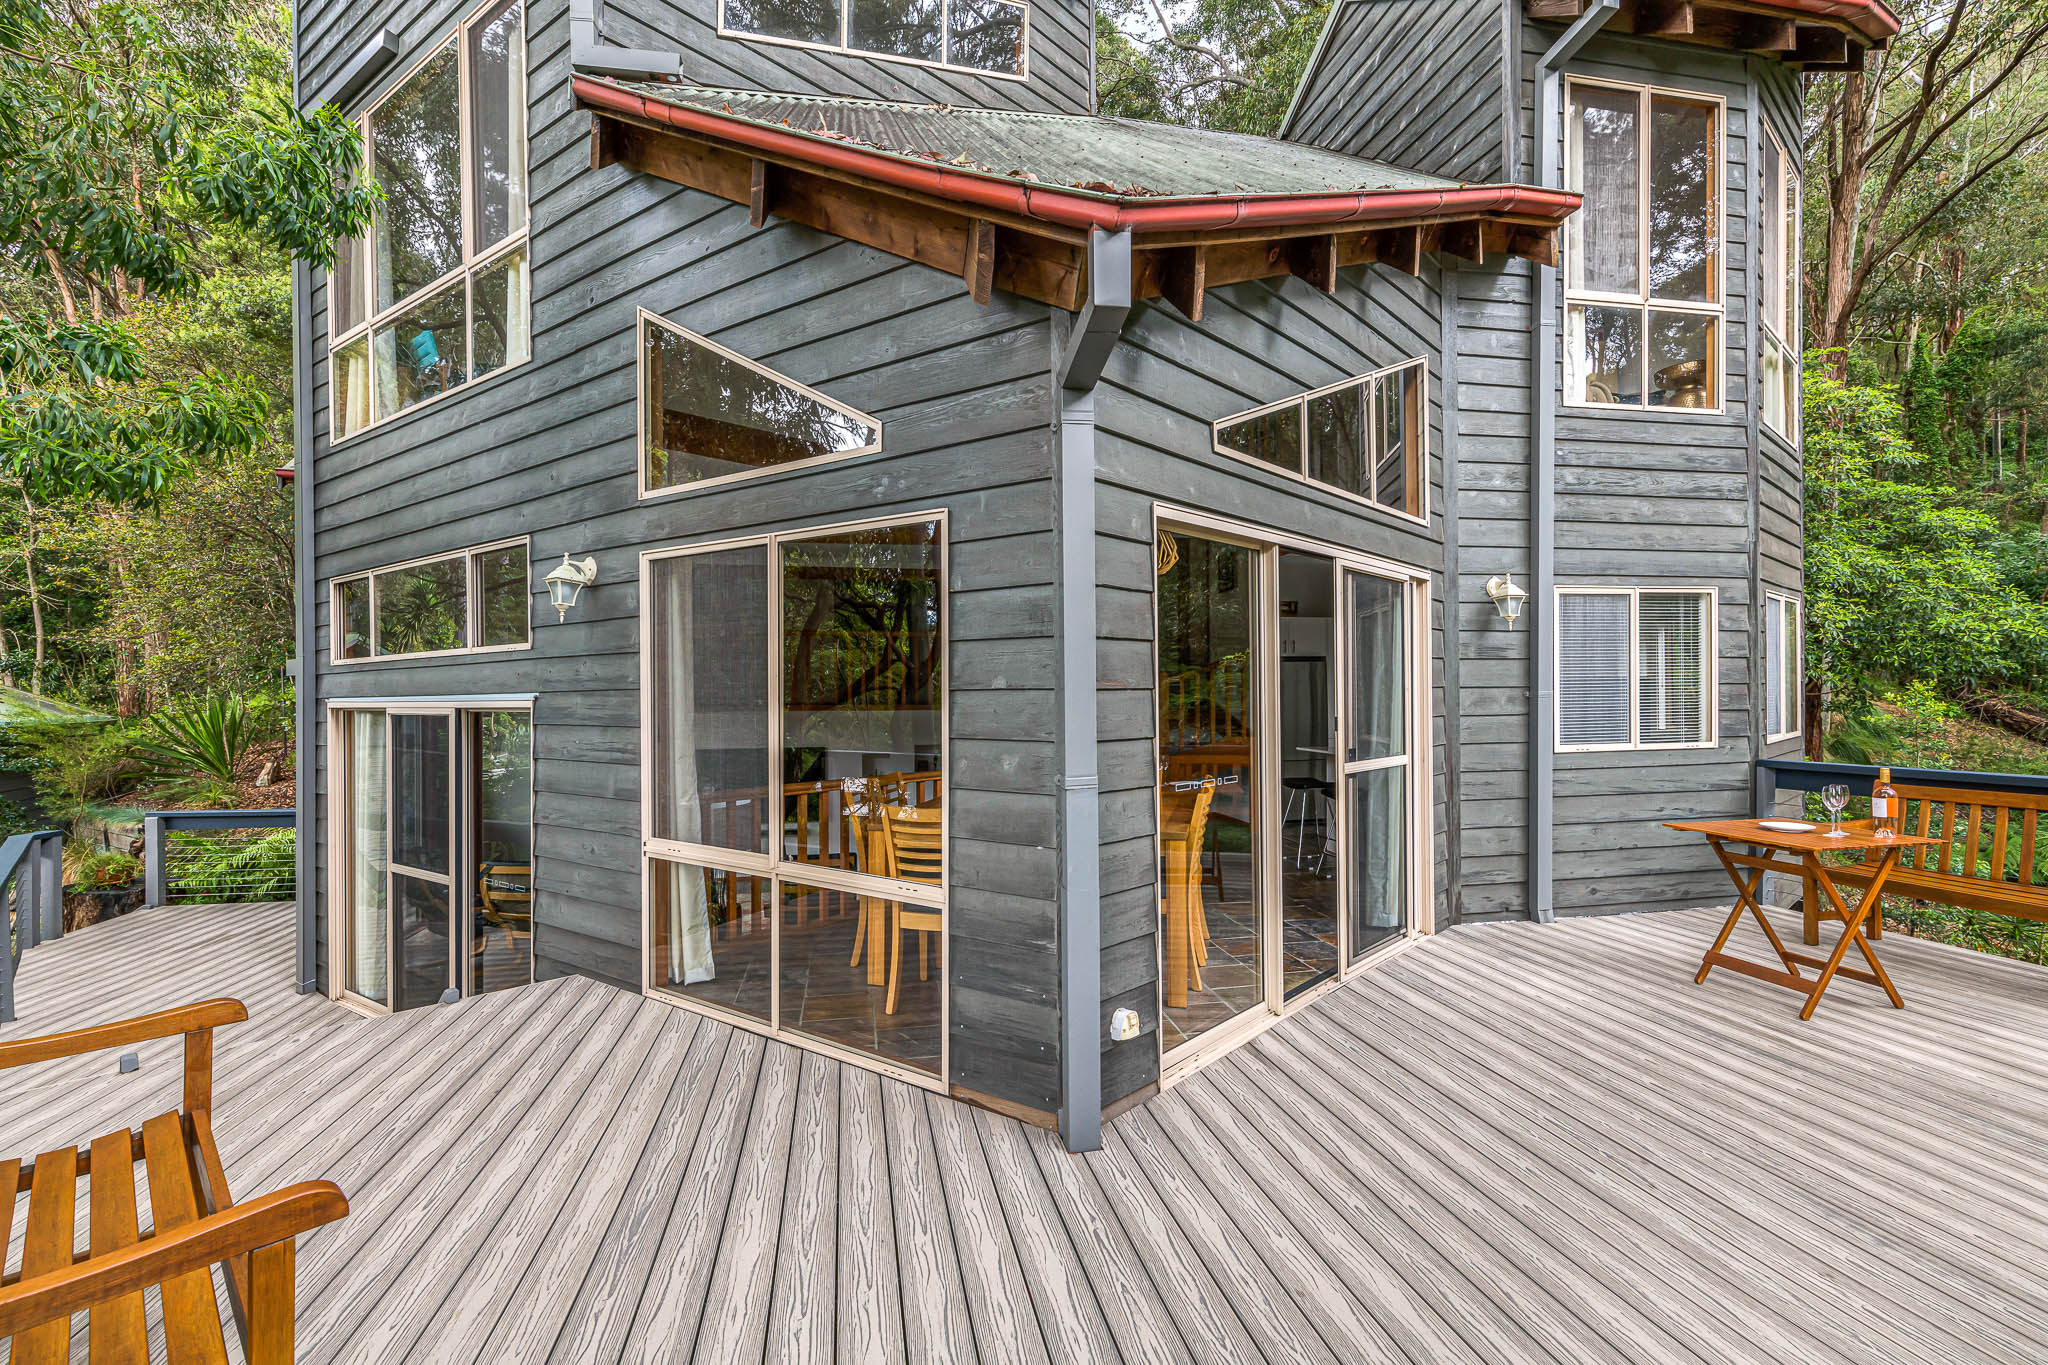 A blue rustic wooden home surrounded by gray-silver titanium decking boards